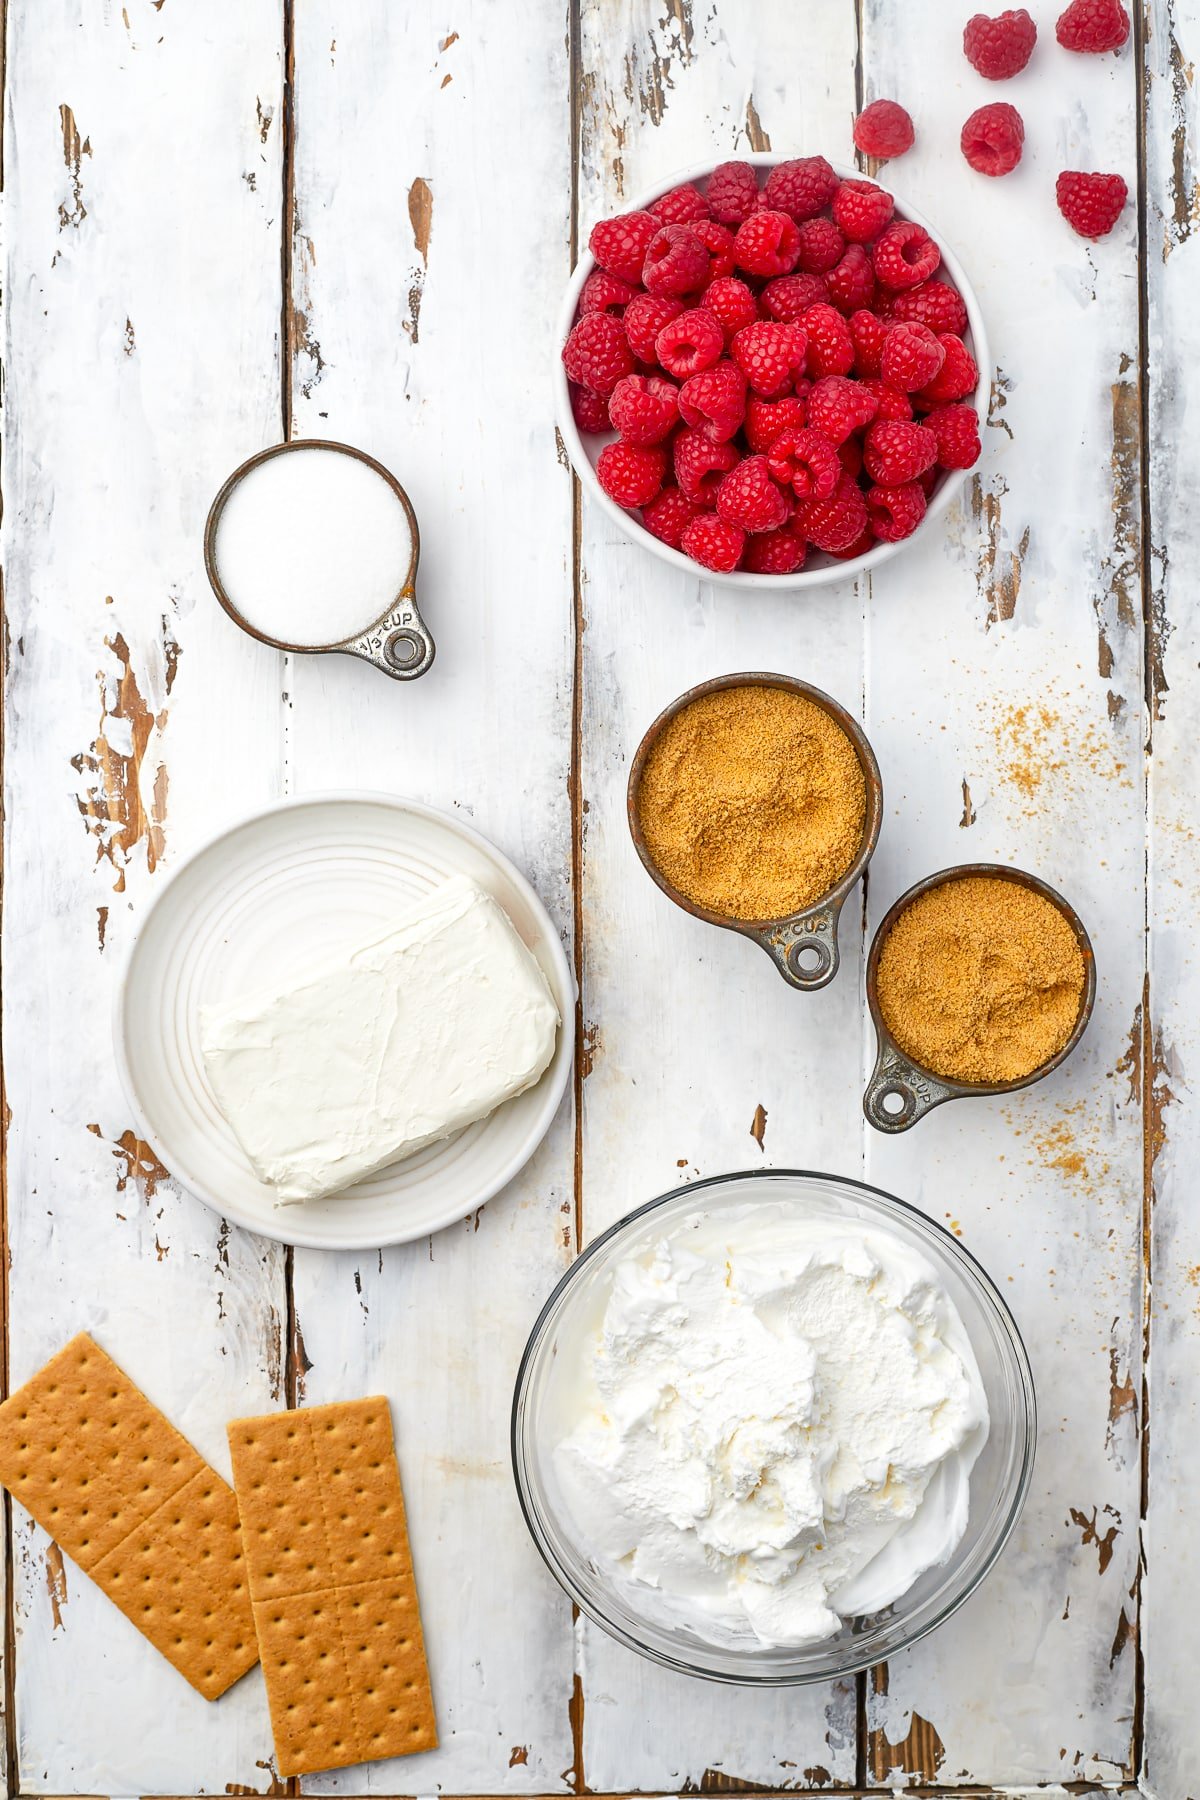 Overhead image showing ingredients needed to make no bake cheesecake bites on a white wooden table top